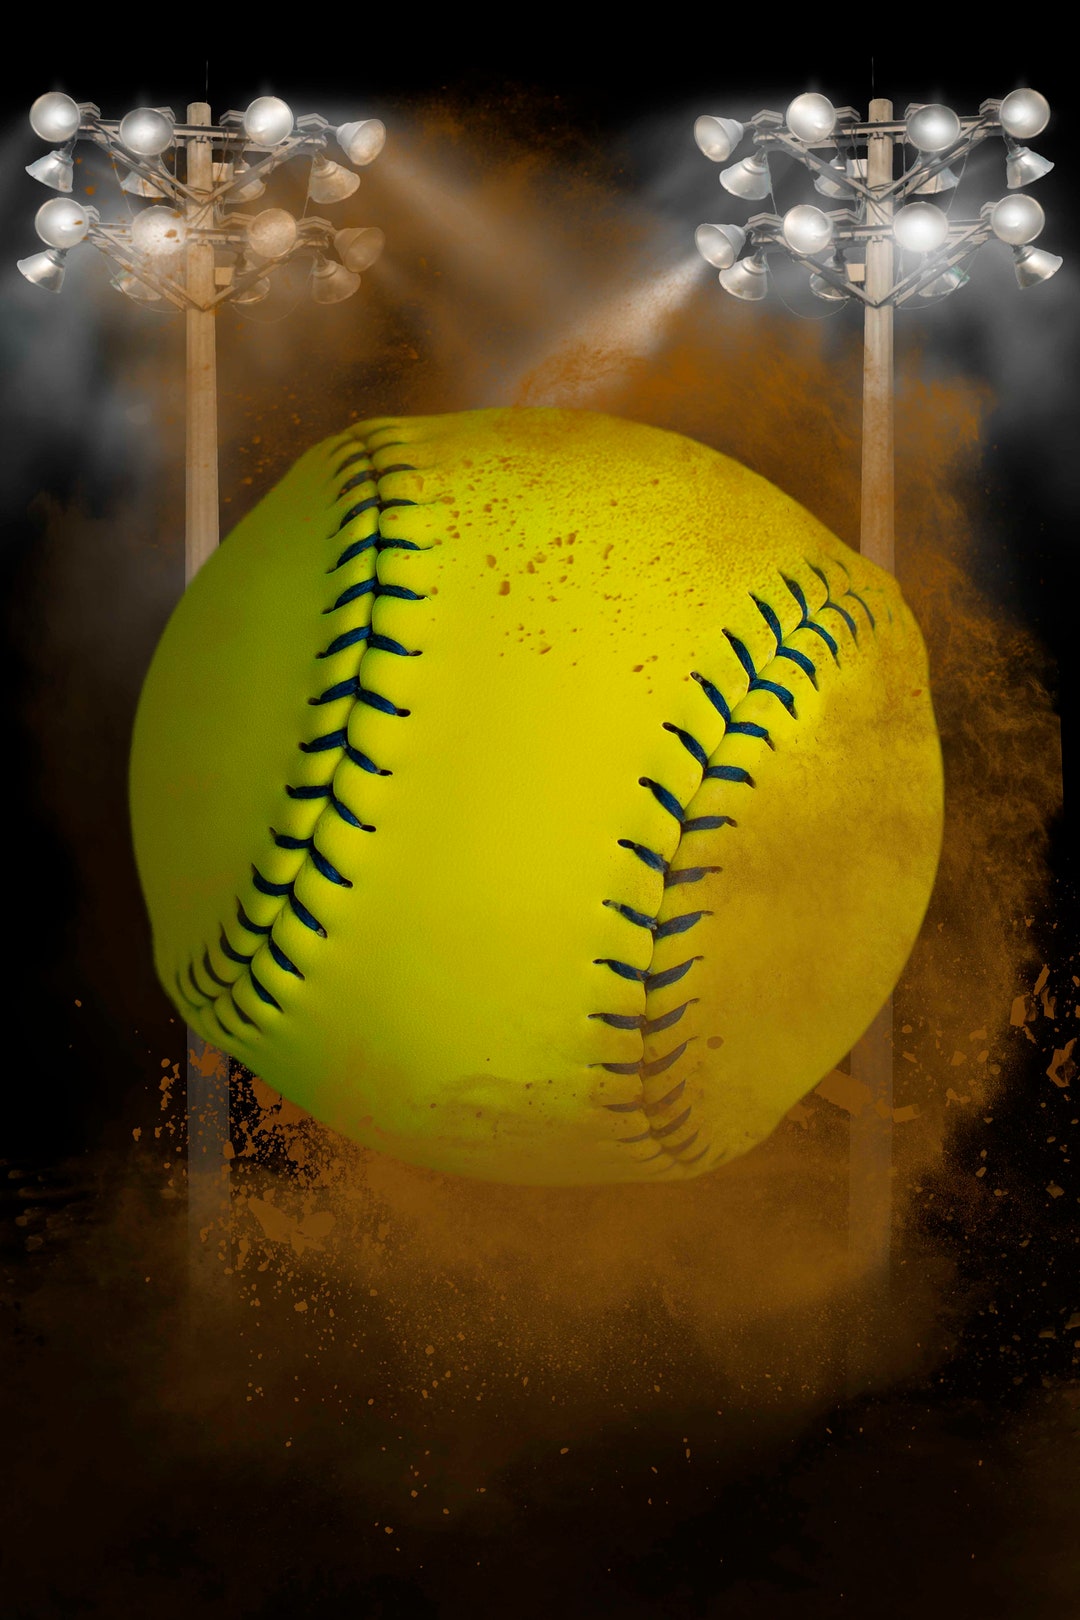 Softball Wallpaper Discover more Background cool Cute Galaxy Iphone  wallpapers httpswwwenjpgcomsoftball13  Softball Softball  backgrounds Wallpaper